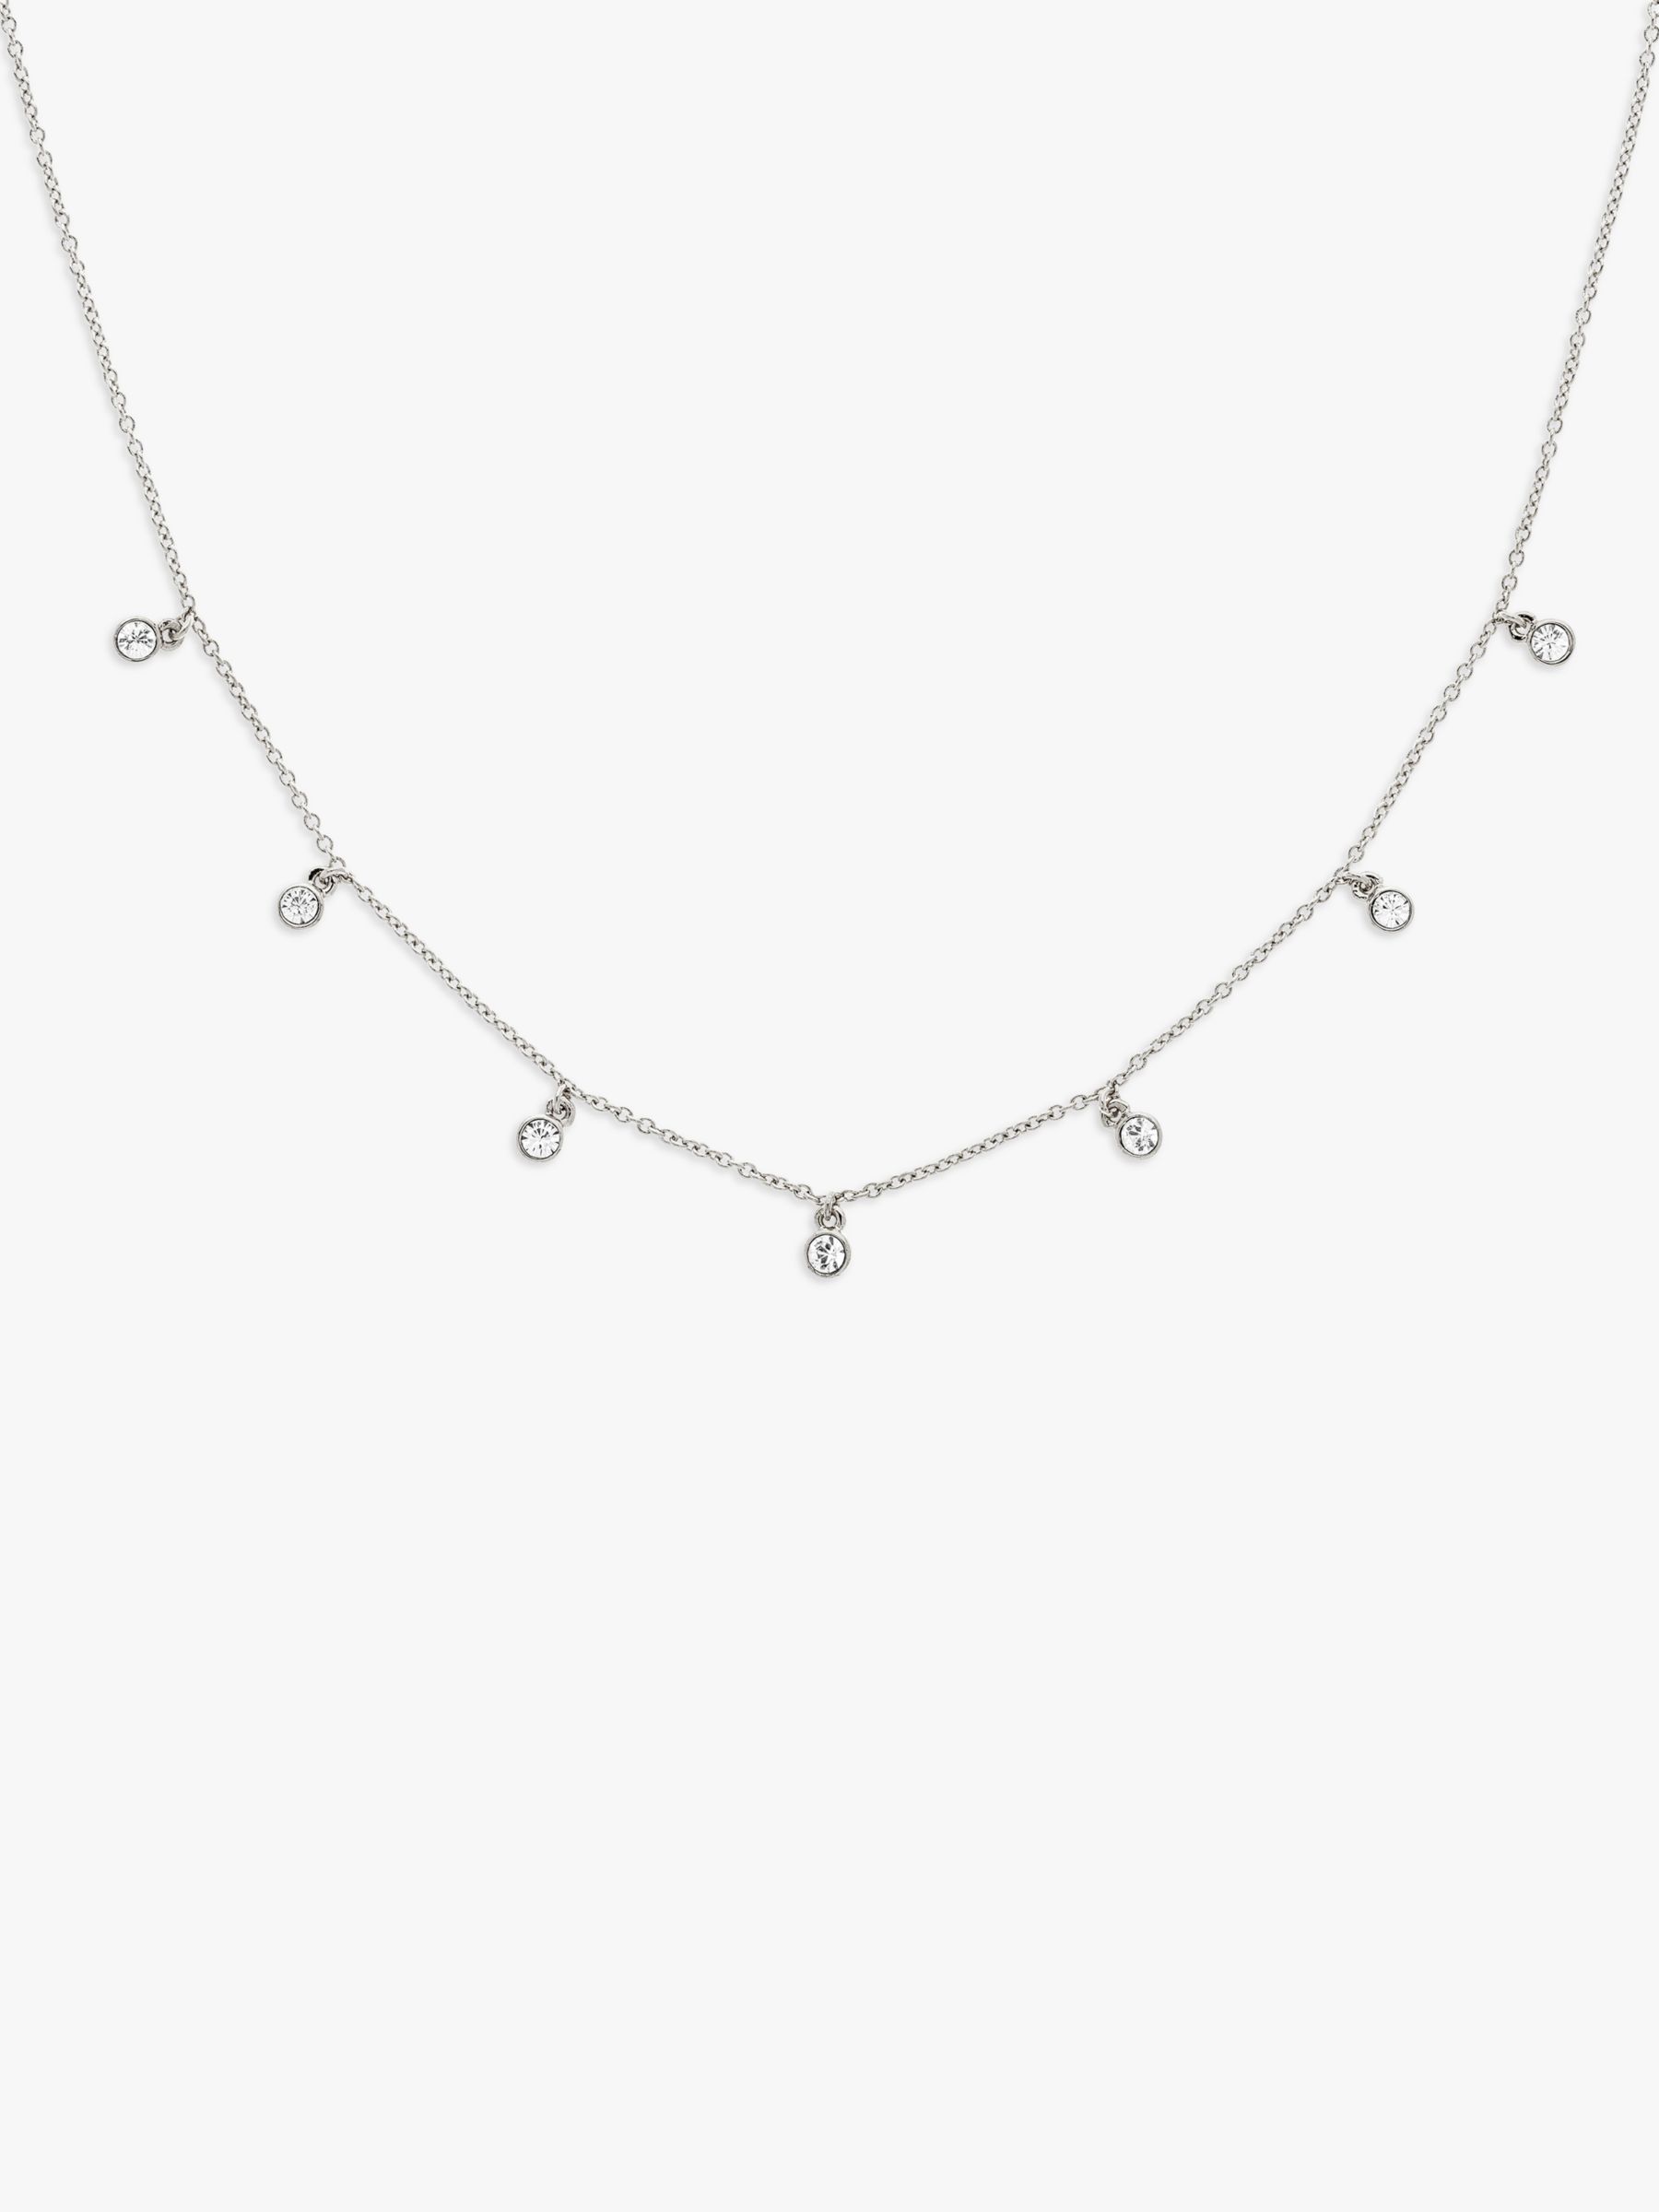 Melissa Odabash Crystal Drop Chain Necklace, Silver